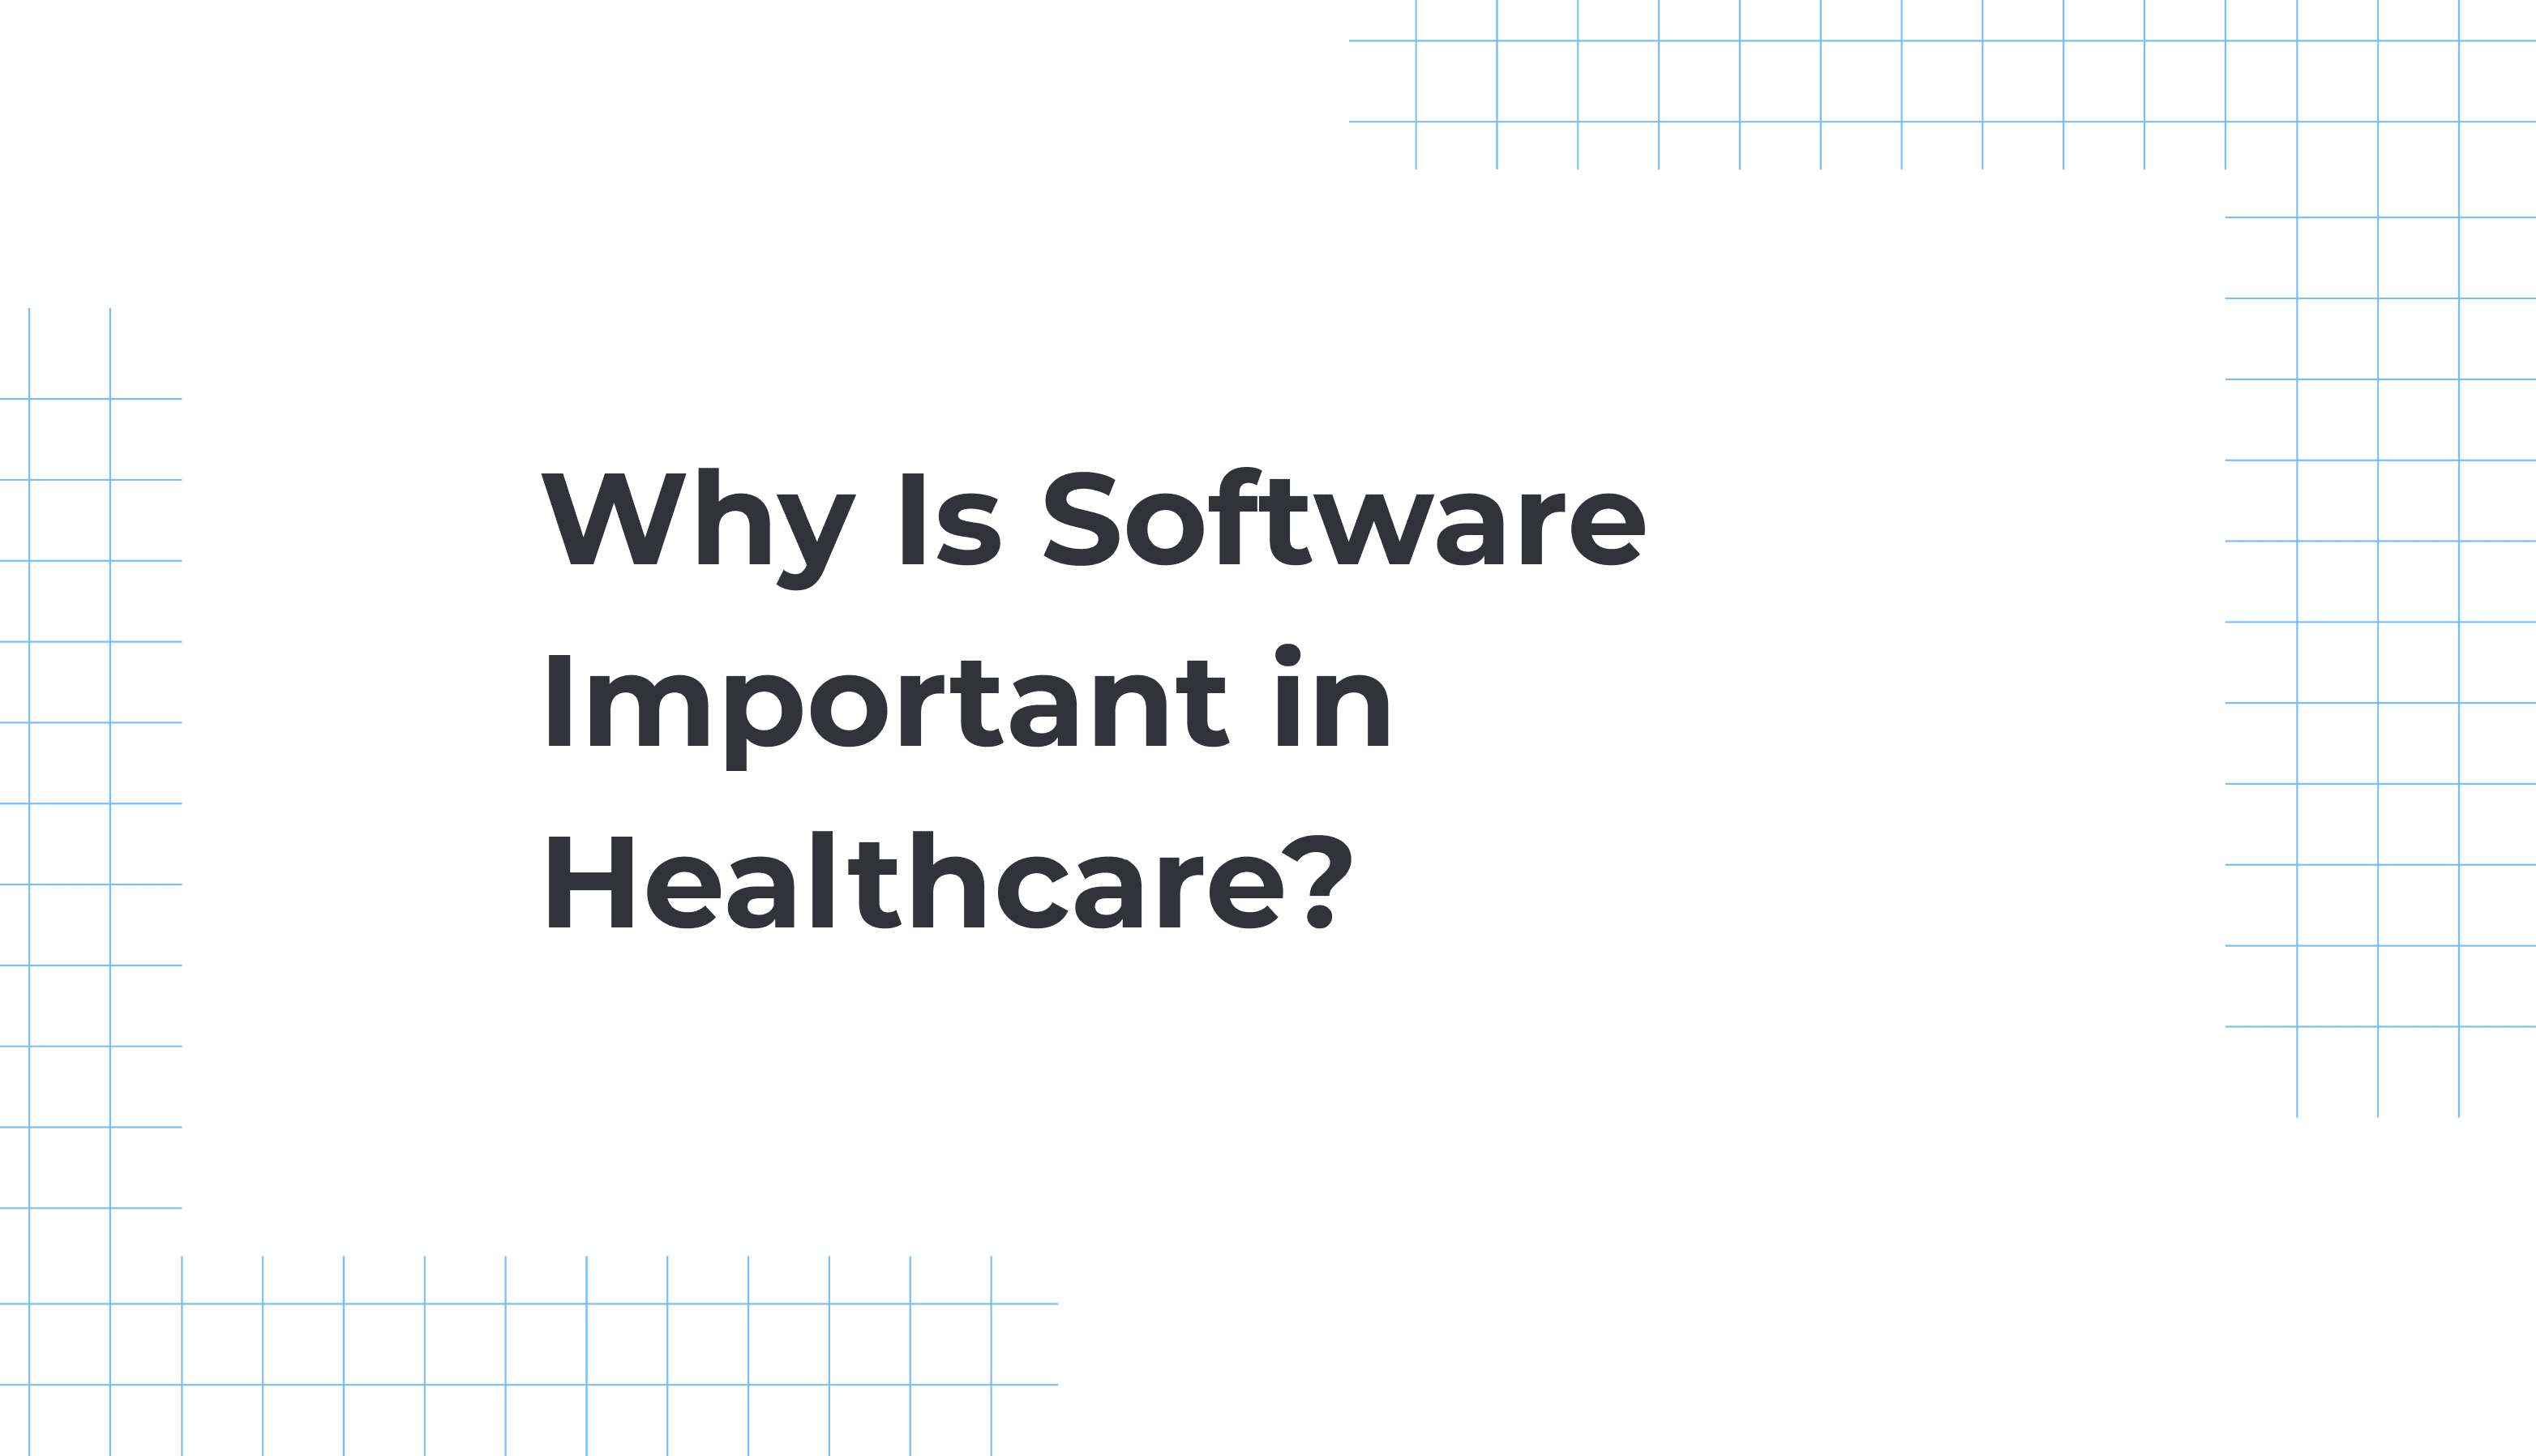 Why is software important in healthcare